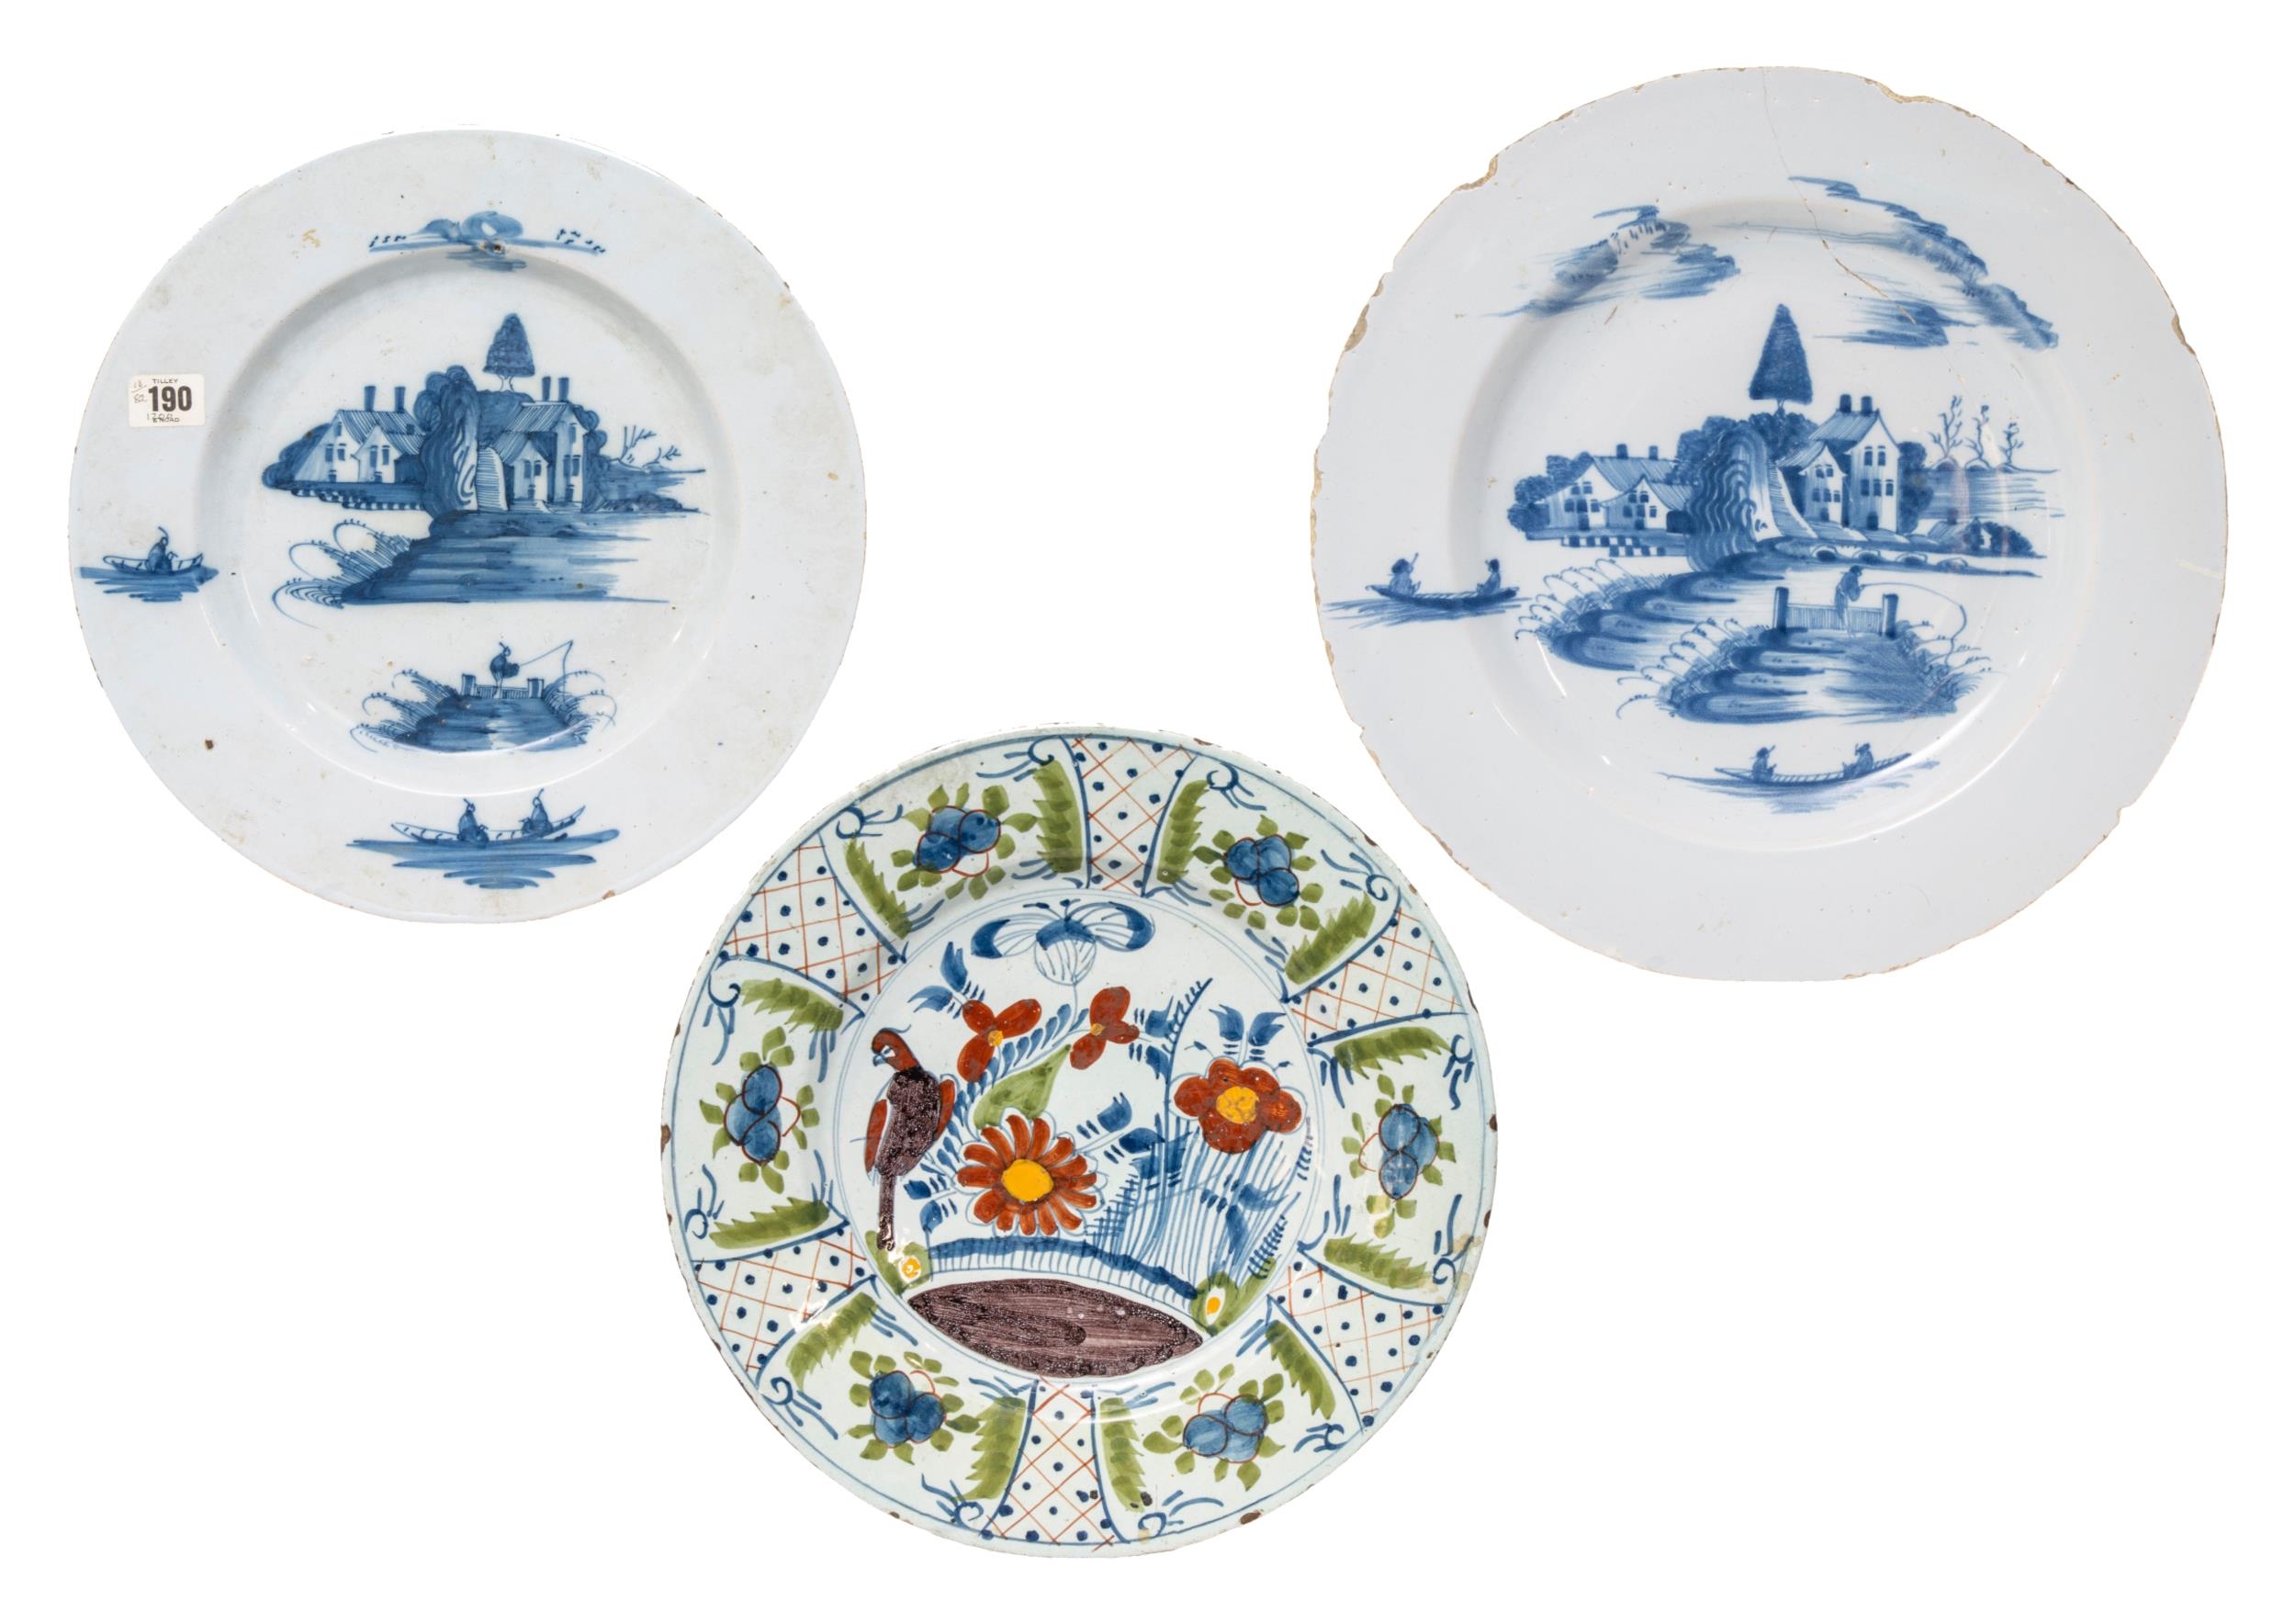 THREE LARGE DELFT DISHES, 18TH CENTURY, consisting of two dishes painted with traditional rural